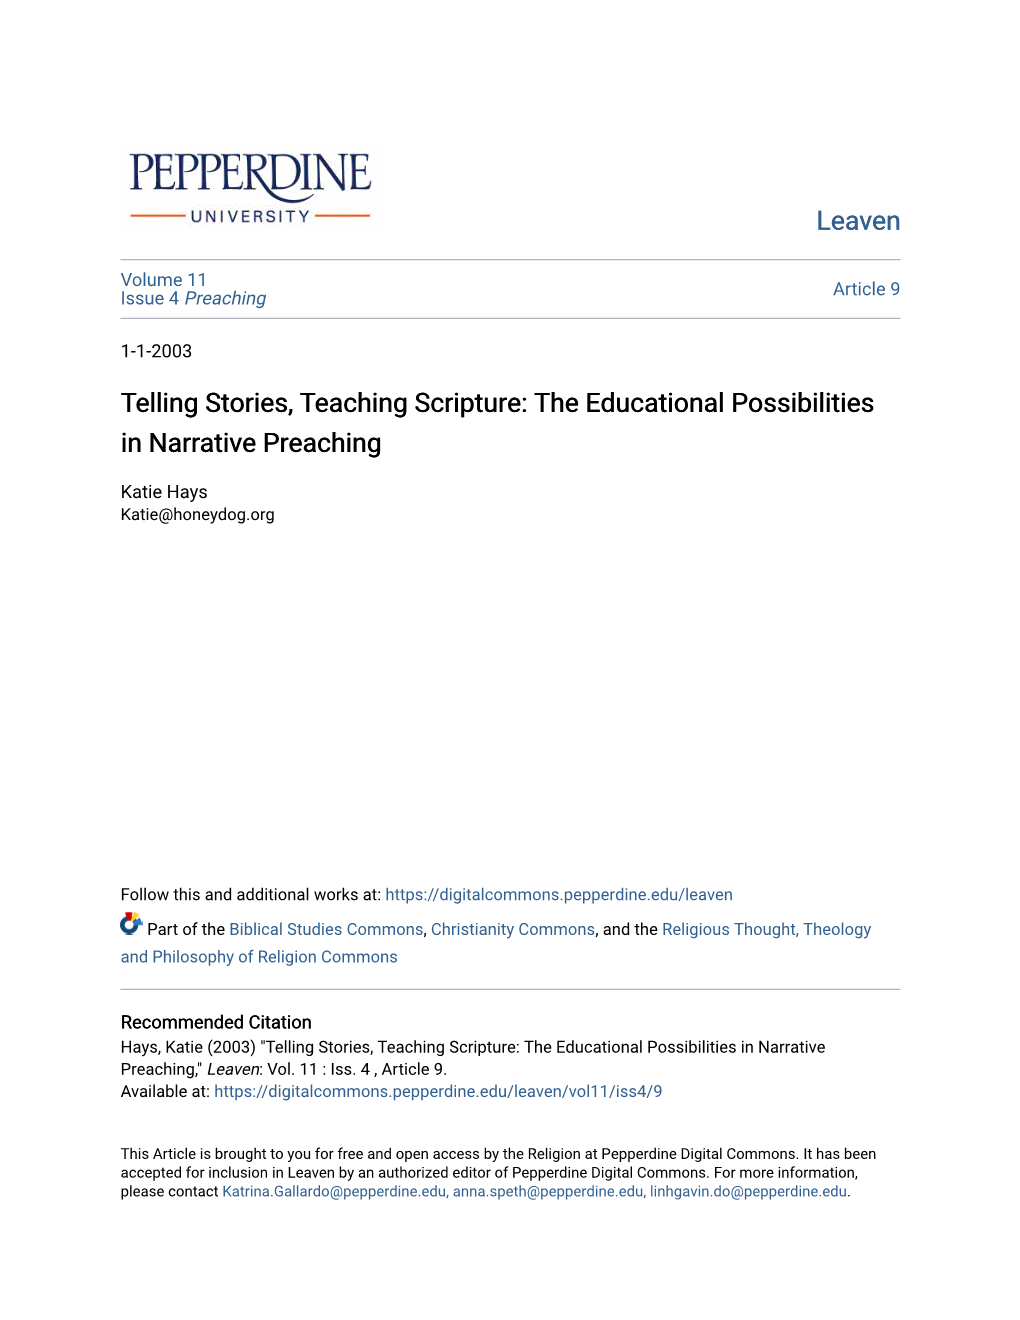 Telling Stories, Teaching Scripture: the Educational Possibilities in Narrative Preaching